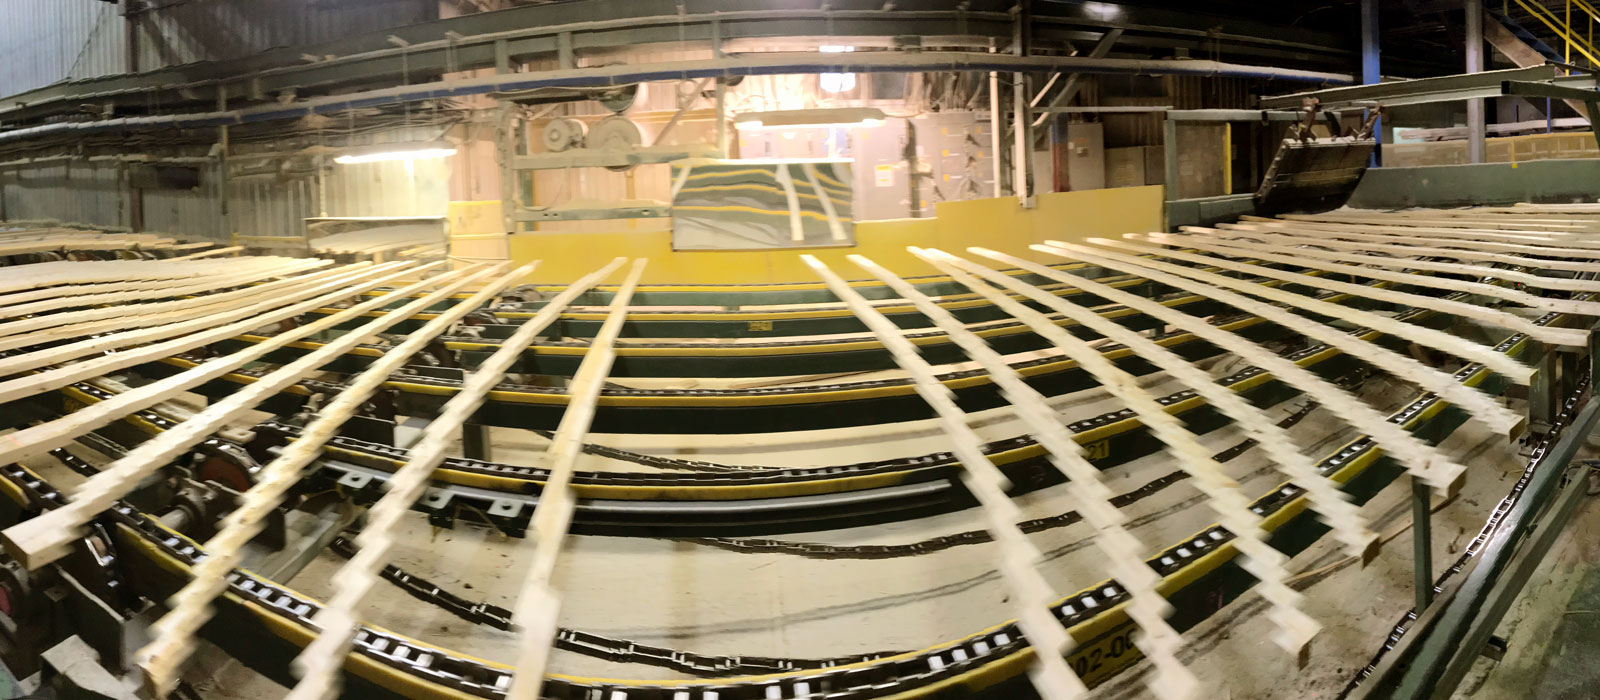 Panoramic view of lumber on conveyor passing in front of mirror